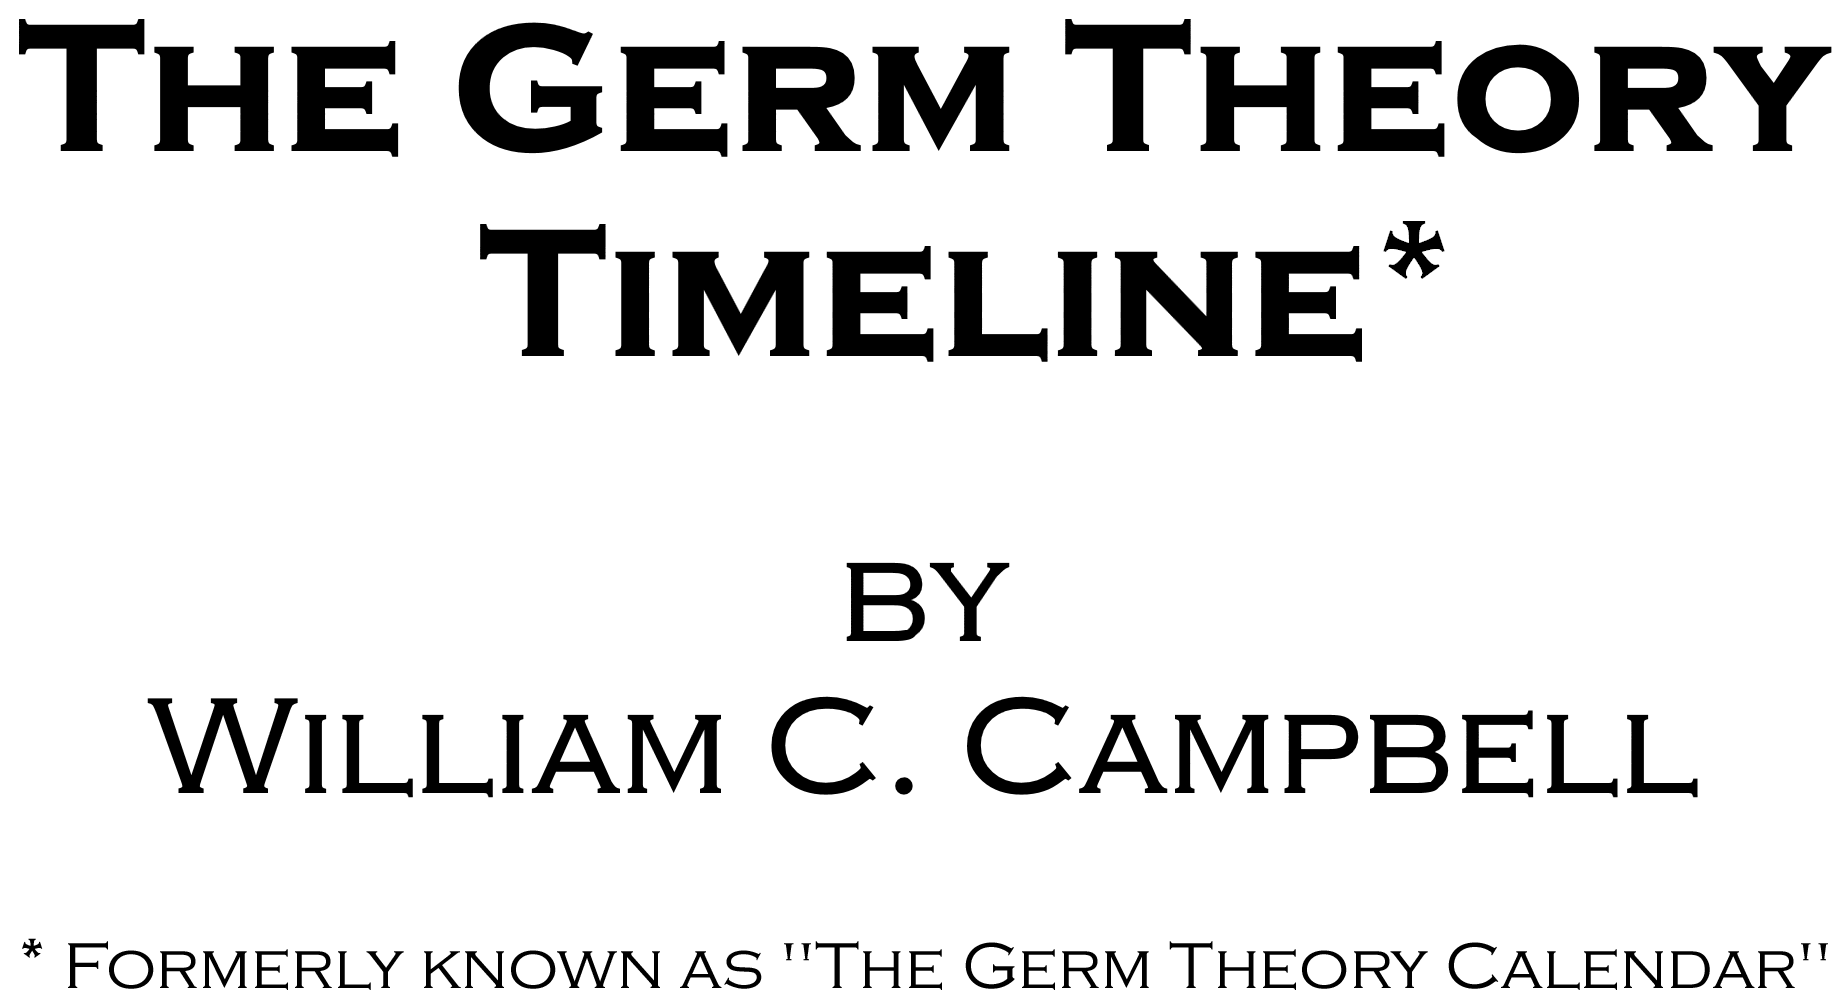 The Germ Theory Timeline by William C. Campbell